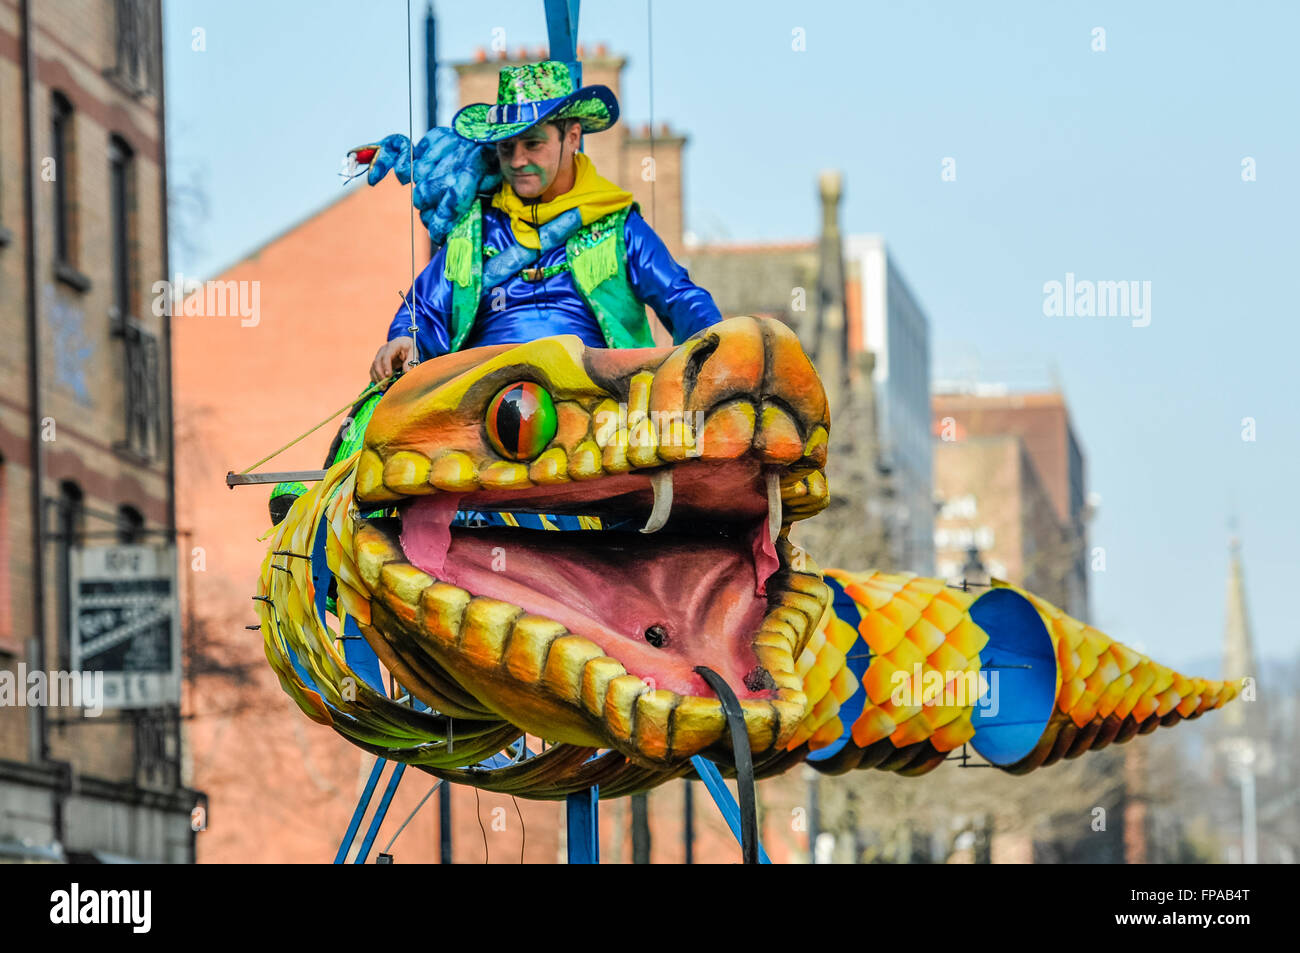 Belfast, Northern Ireland, UK. 17th March, 2016. A man rides a giant snake at the annual Saint Patrick's Parade. Credit:  Stephen Barnes/Alamy Live News Stock Photo